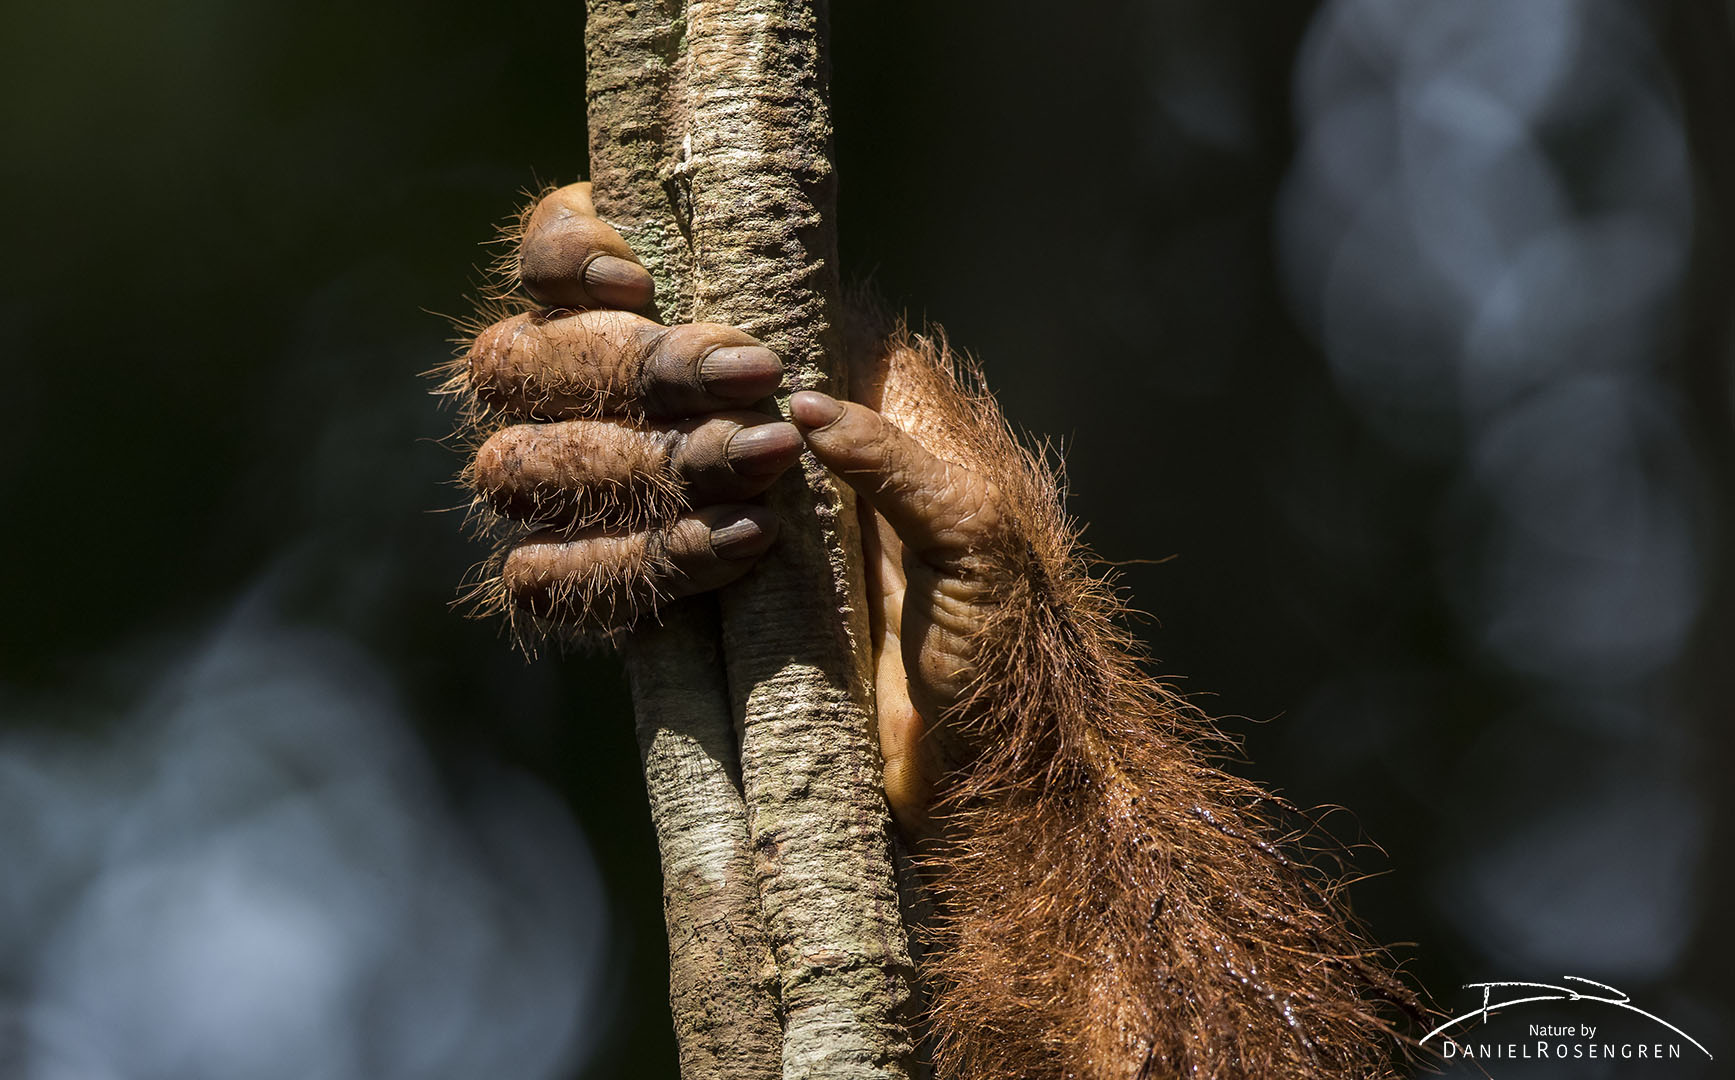 The hand of an orang-utan learning to survive in the wild. © Daniel Rosengren